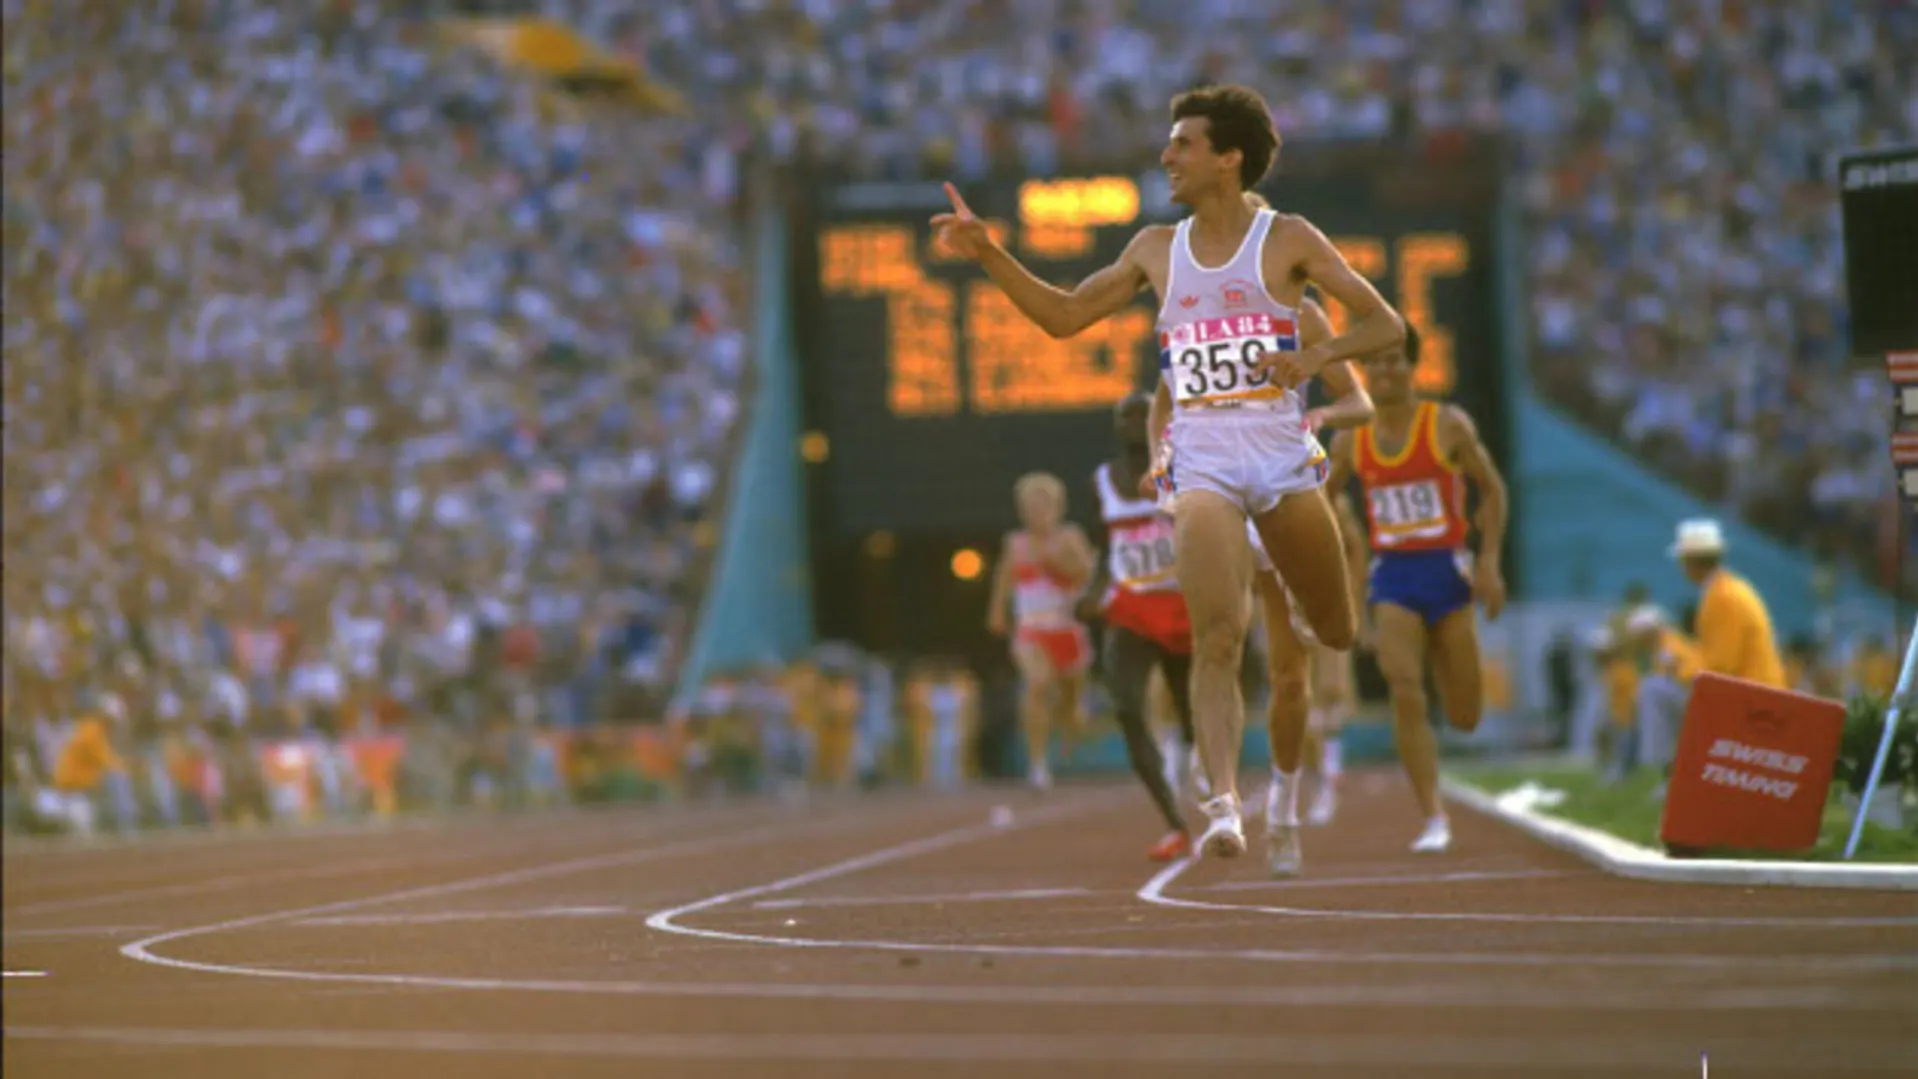 Sebastian Coe has been defying the critics since he was a runner, winning consecutive Olympic 1500m gold medals after his chances were dismissed before each race ©Getty Images